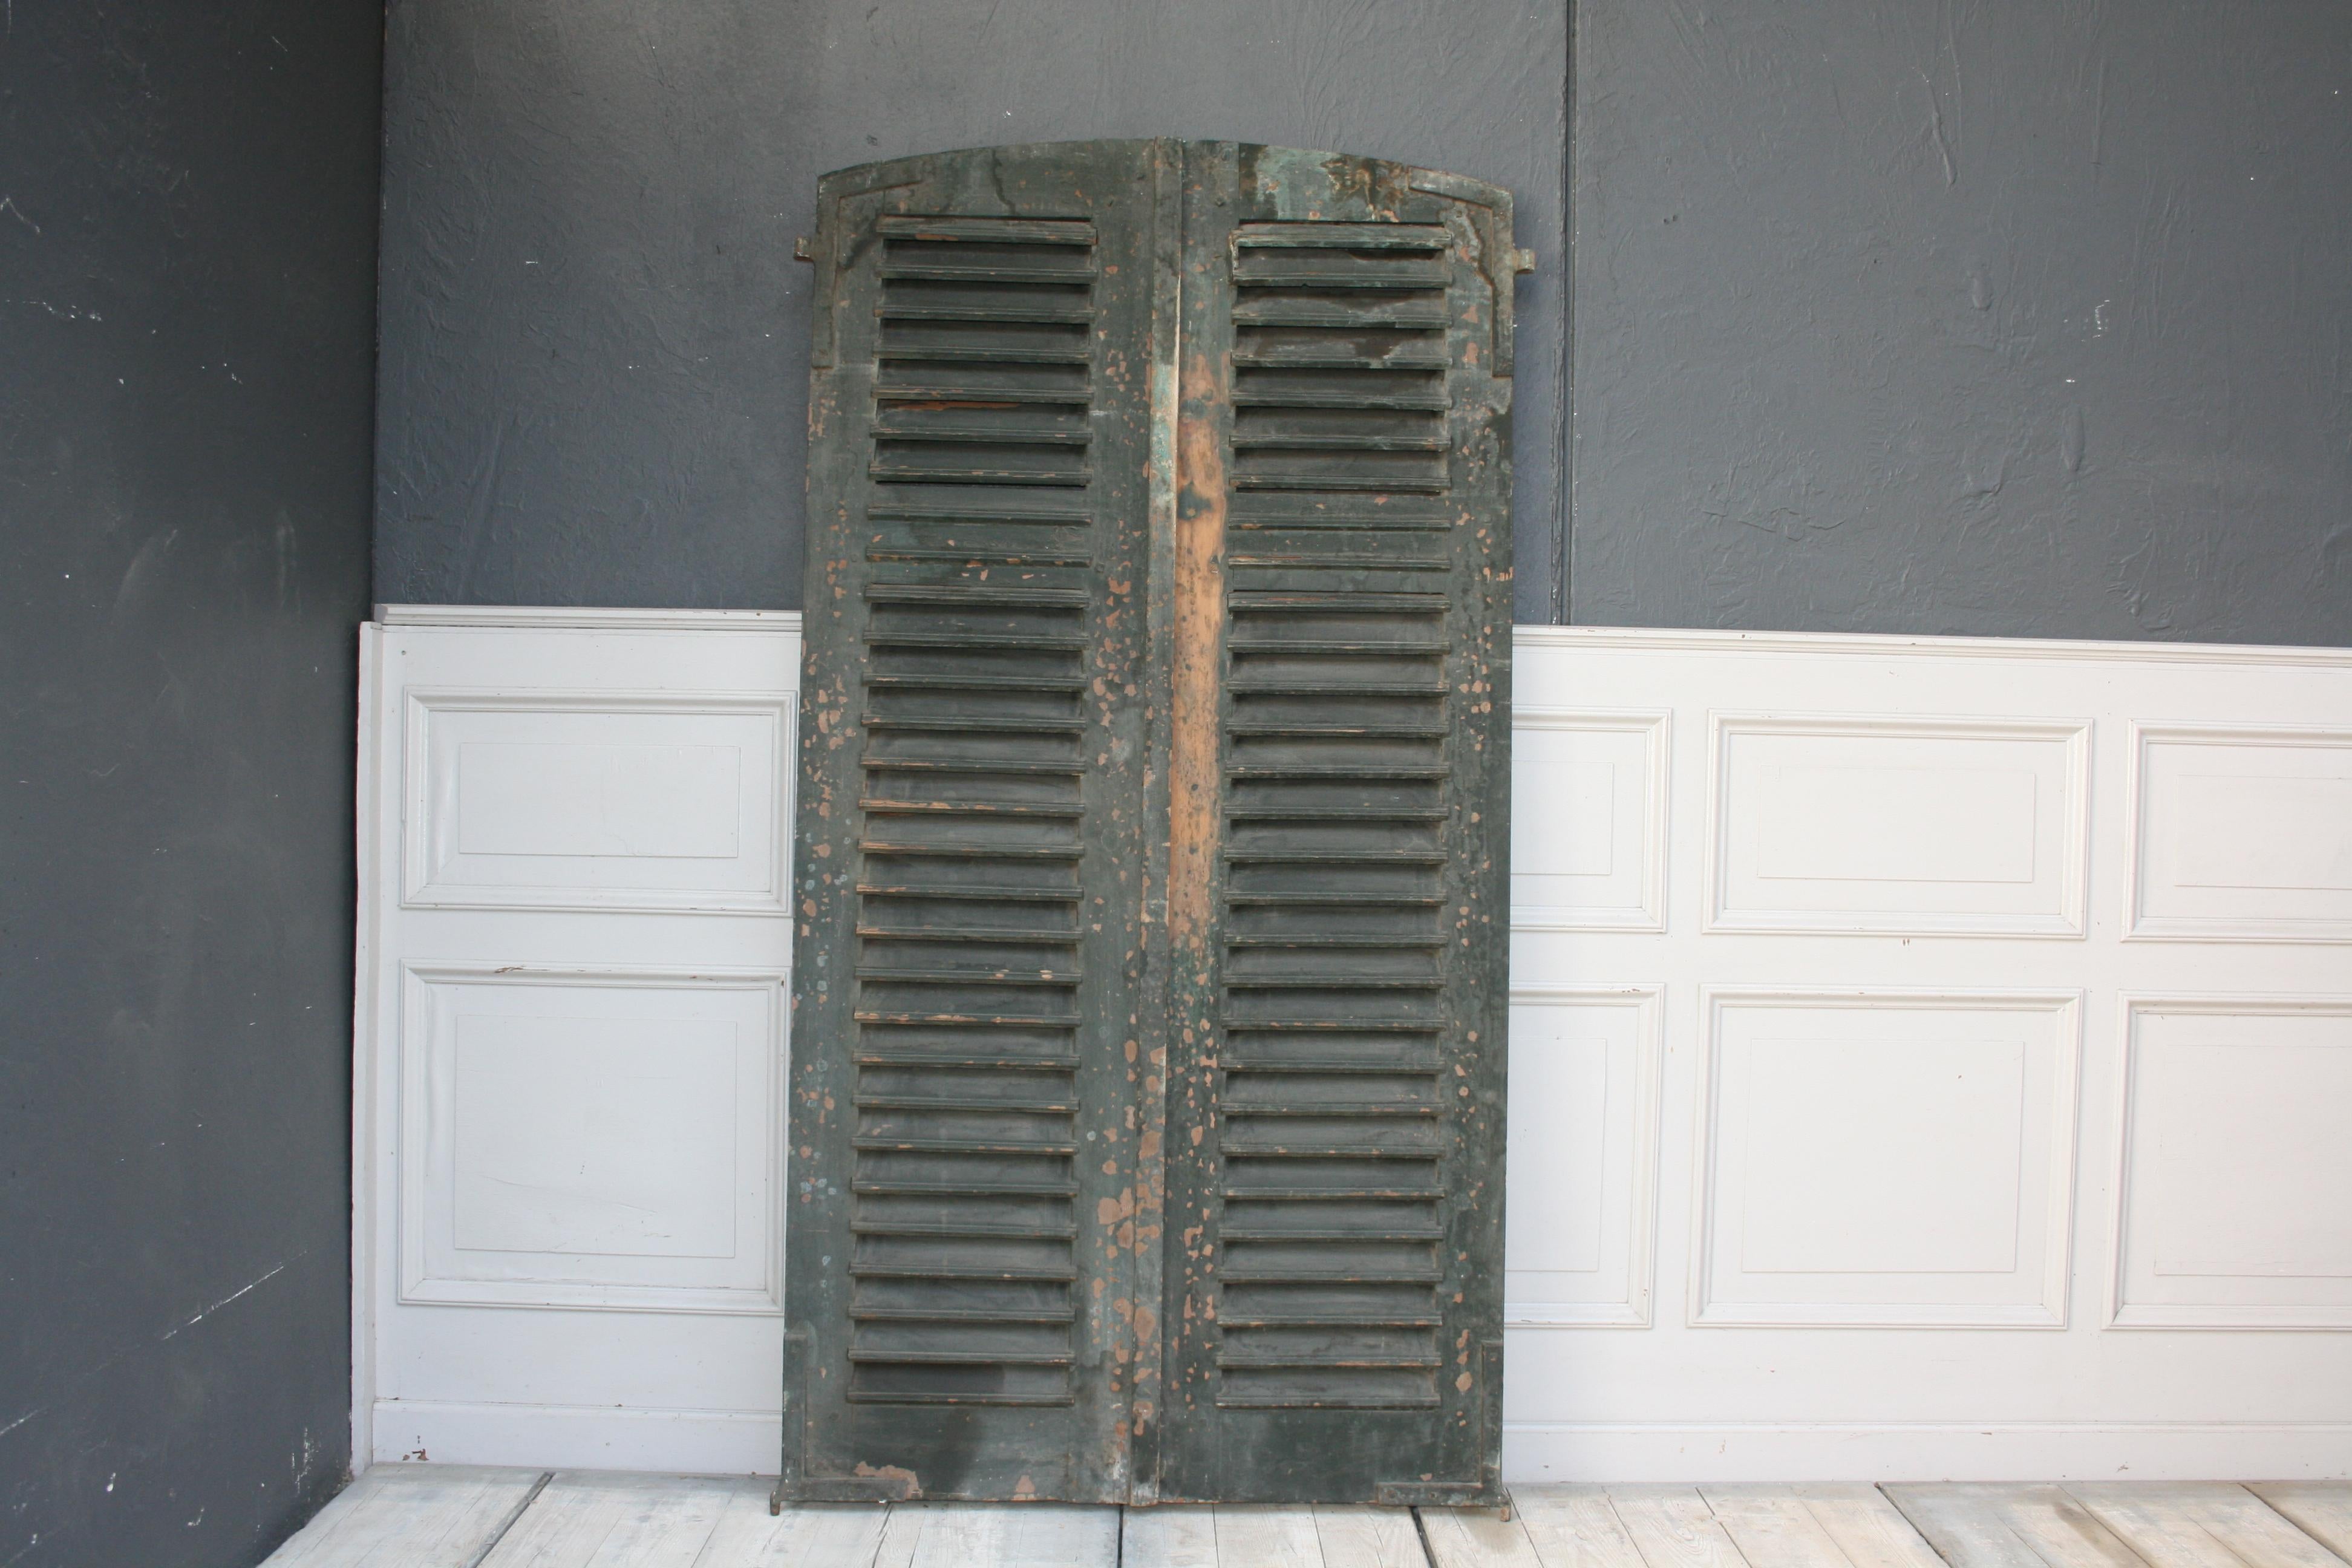 Pair of eyebrow shape shutters from France, circa late 19th century. The shutters still have the original color and thus a wonderful weathered patina.
Dimensions:
195 cm high / 76.77 inch high,
100 cm wide / 39.37 inch wide,
4 cm deep / 1.57